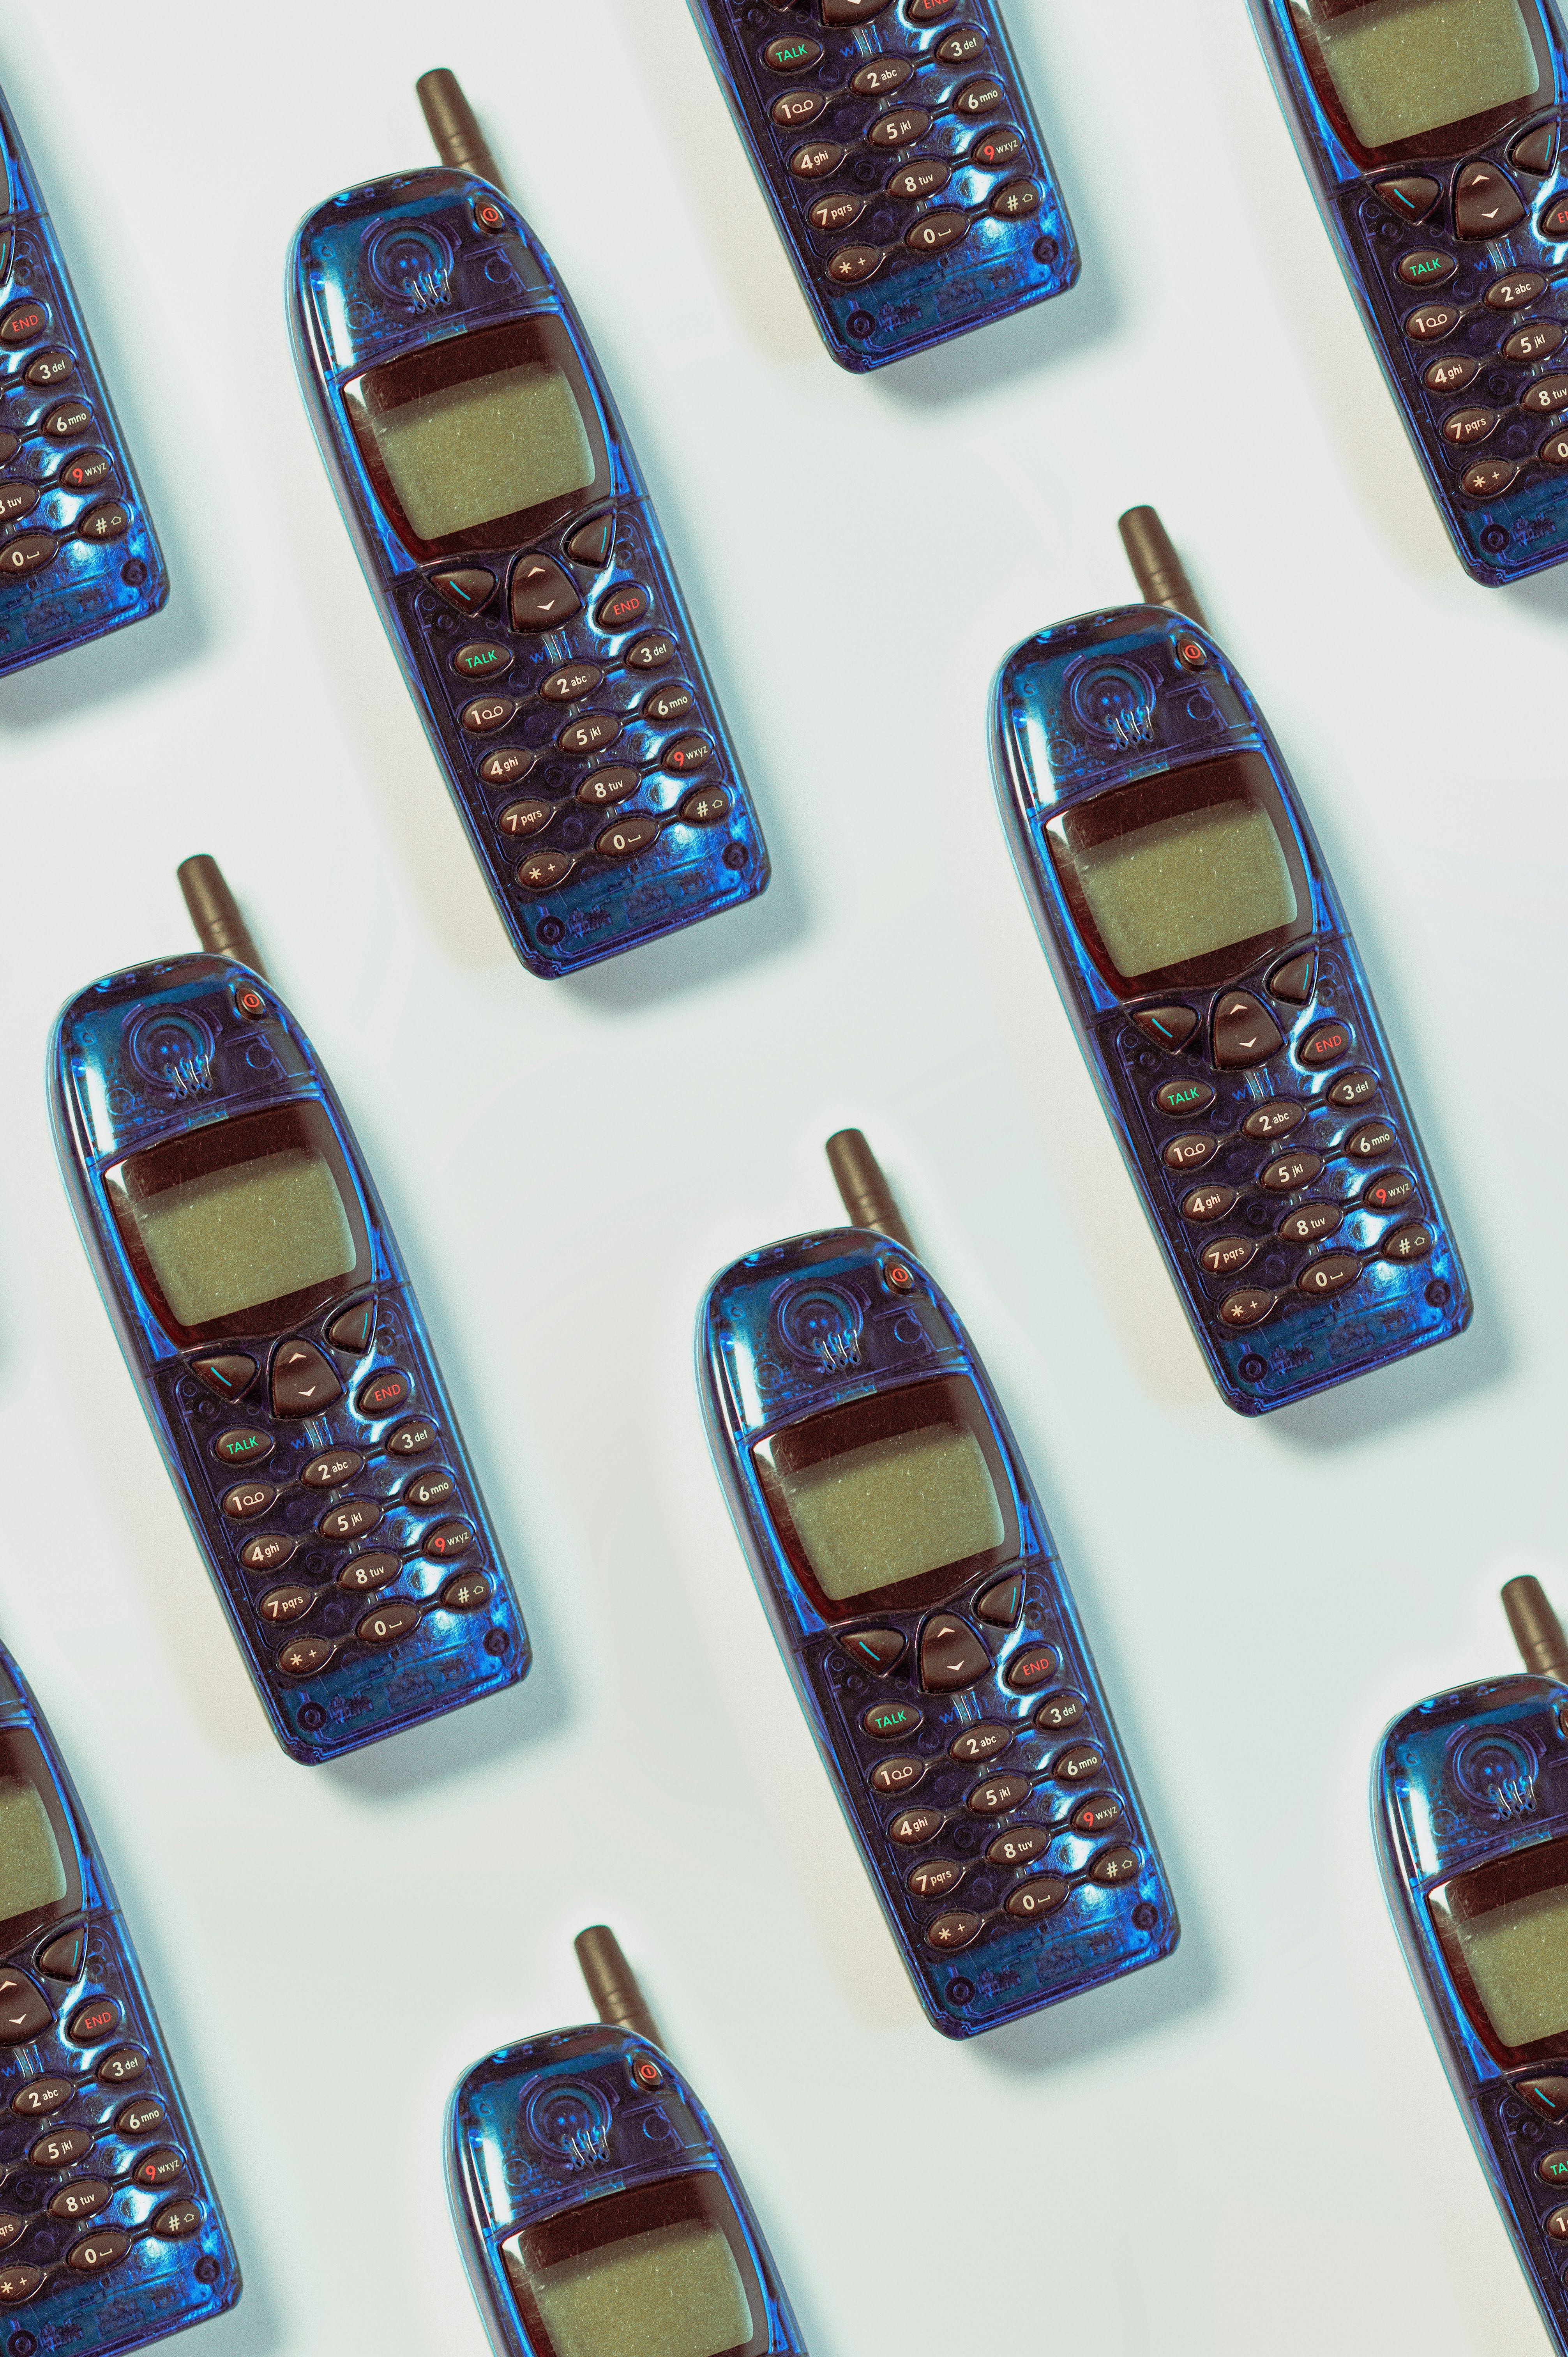 clear blue array of nokia's 6110 on white background.